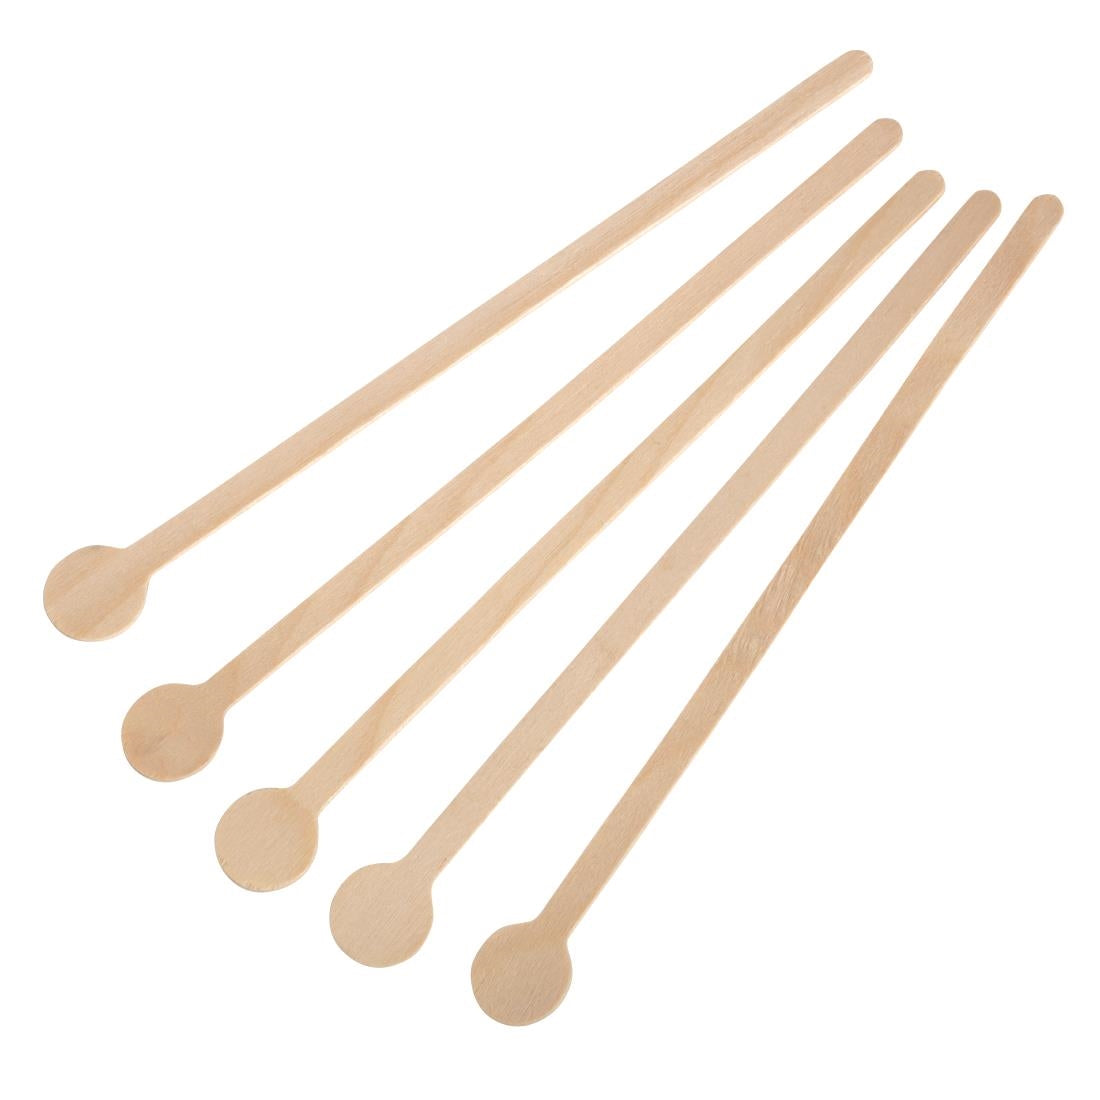 DB494 Fiesta Compostable Wooden Cocktail Stirrers 200mm (Pack of 100) JD Catering Equipment Solutions Ltd